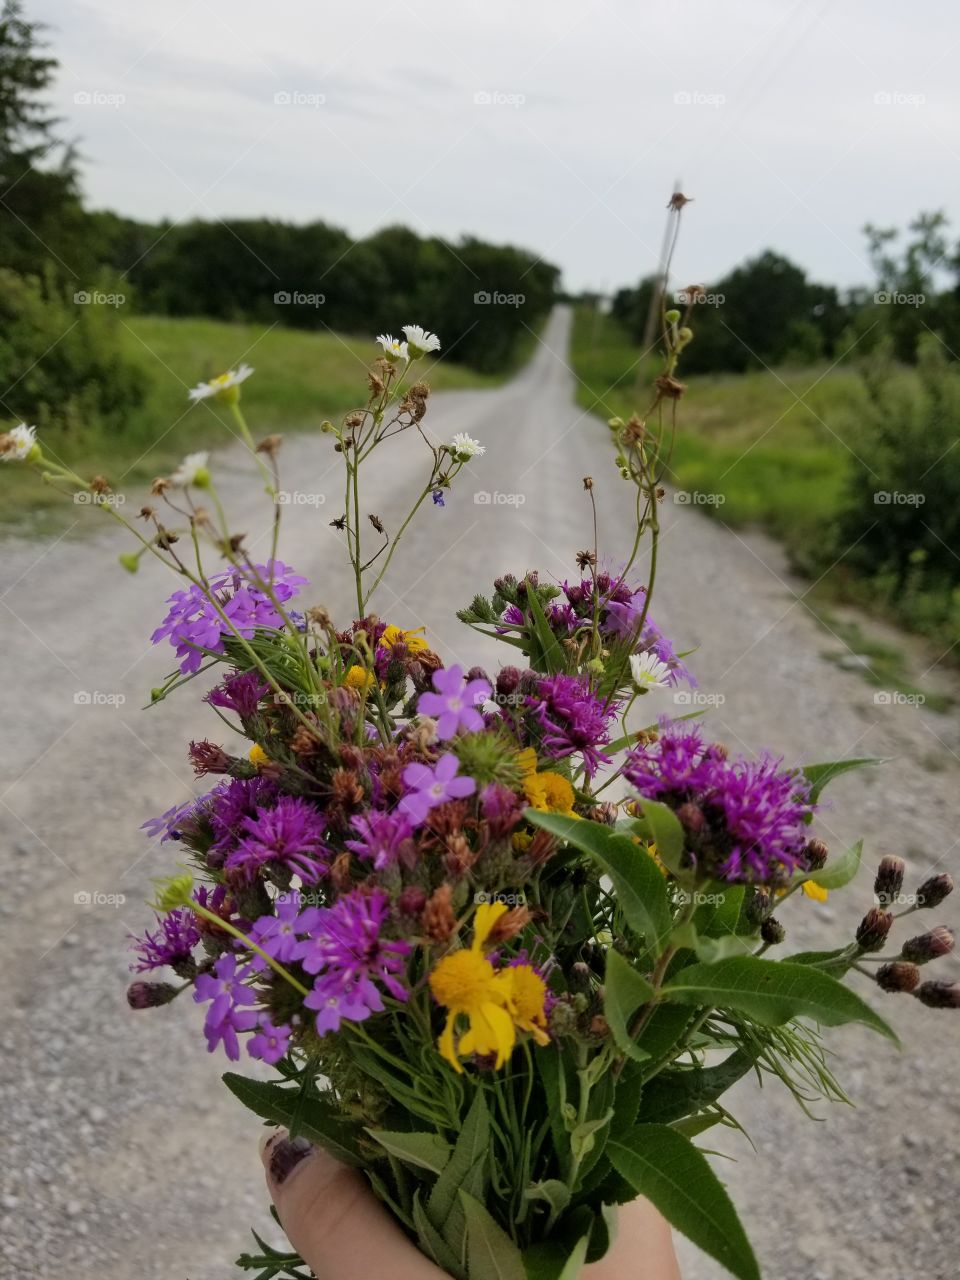 Wild flowers framed by vintage country gravel road